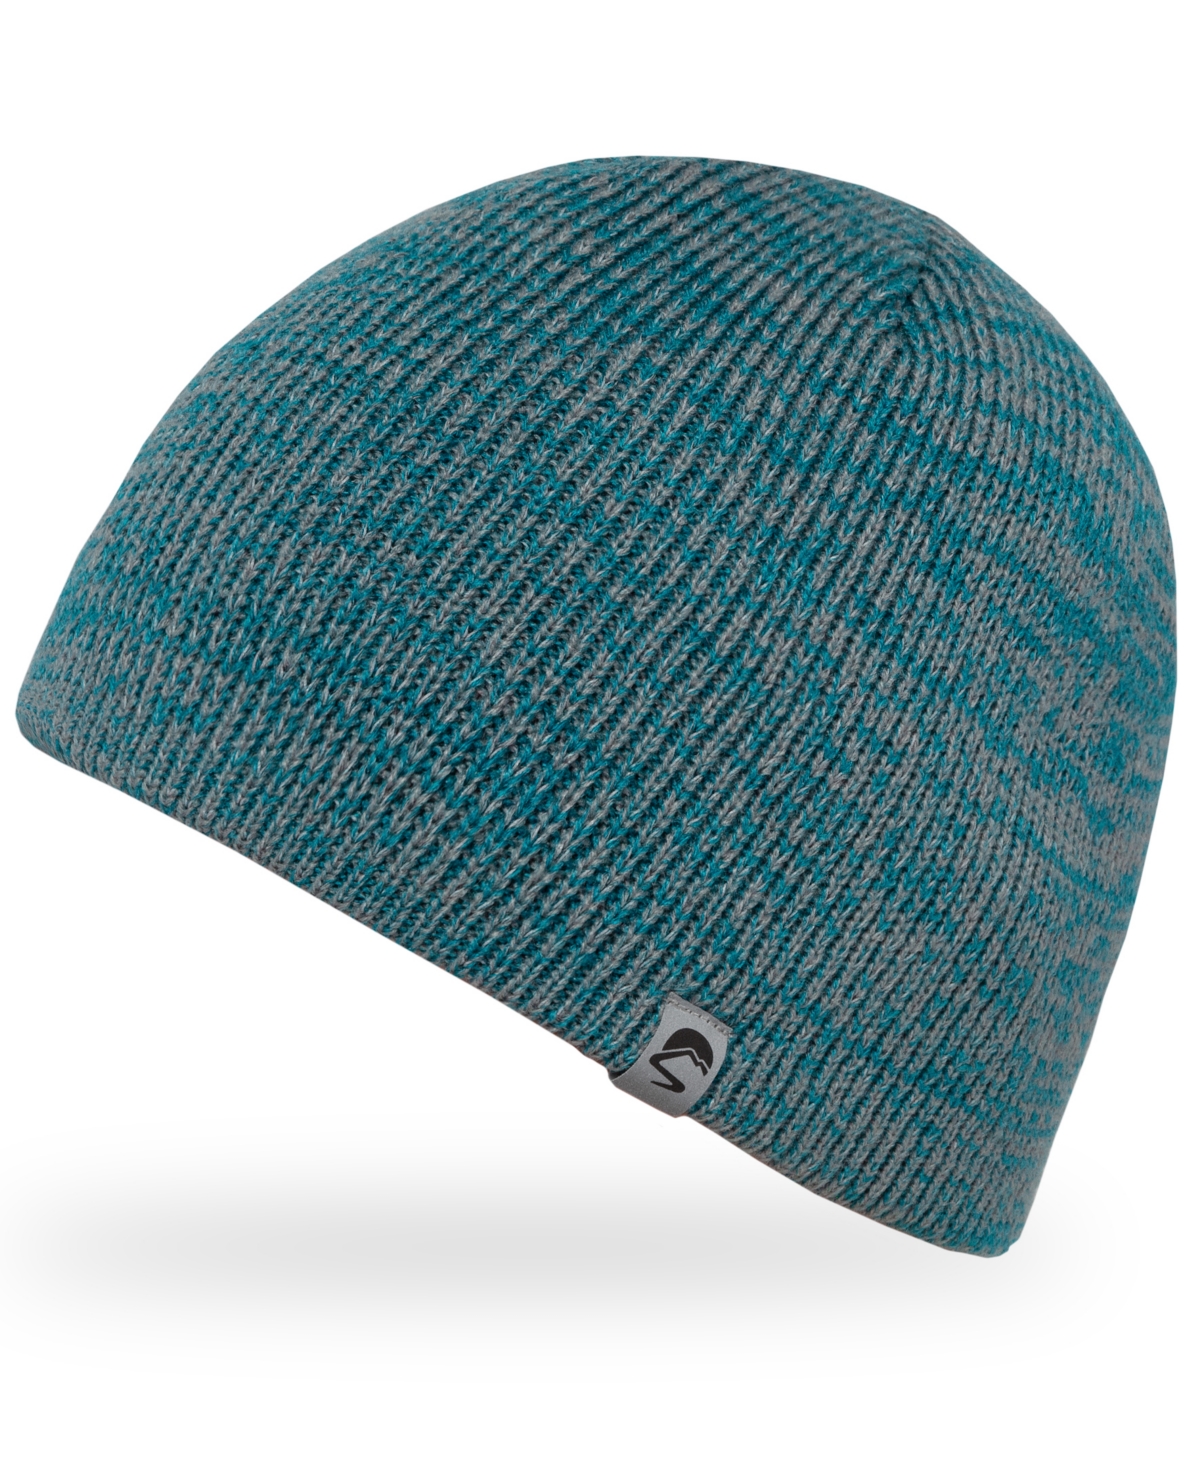 Sunday Afternoons Nightfall Reflective Beanie In Blue Moon,quarry